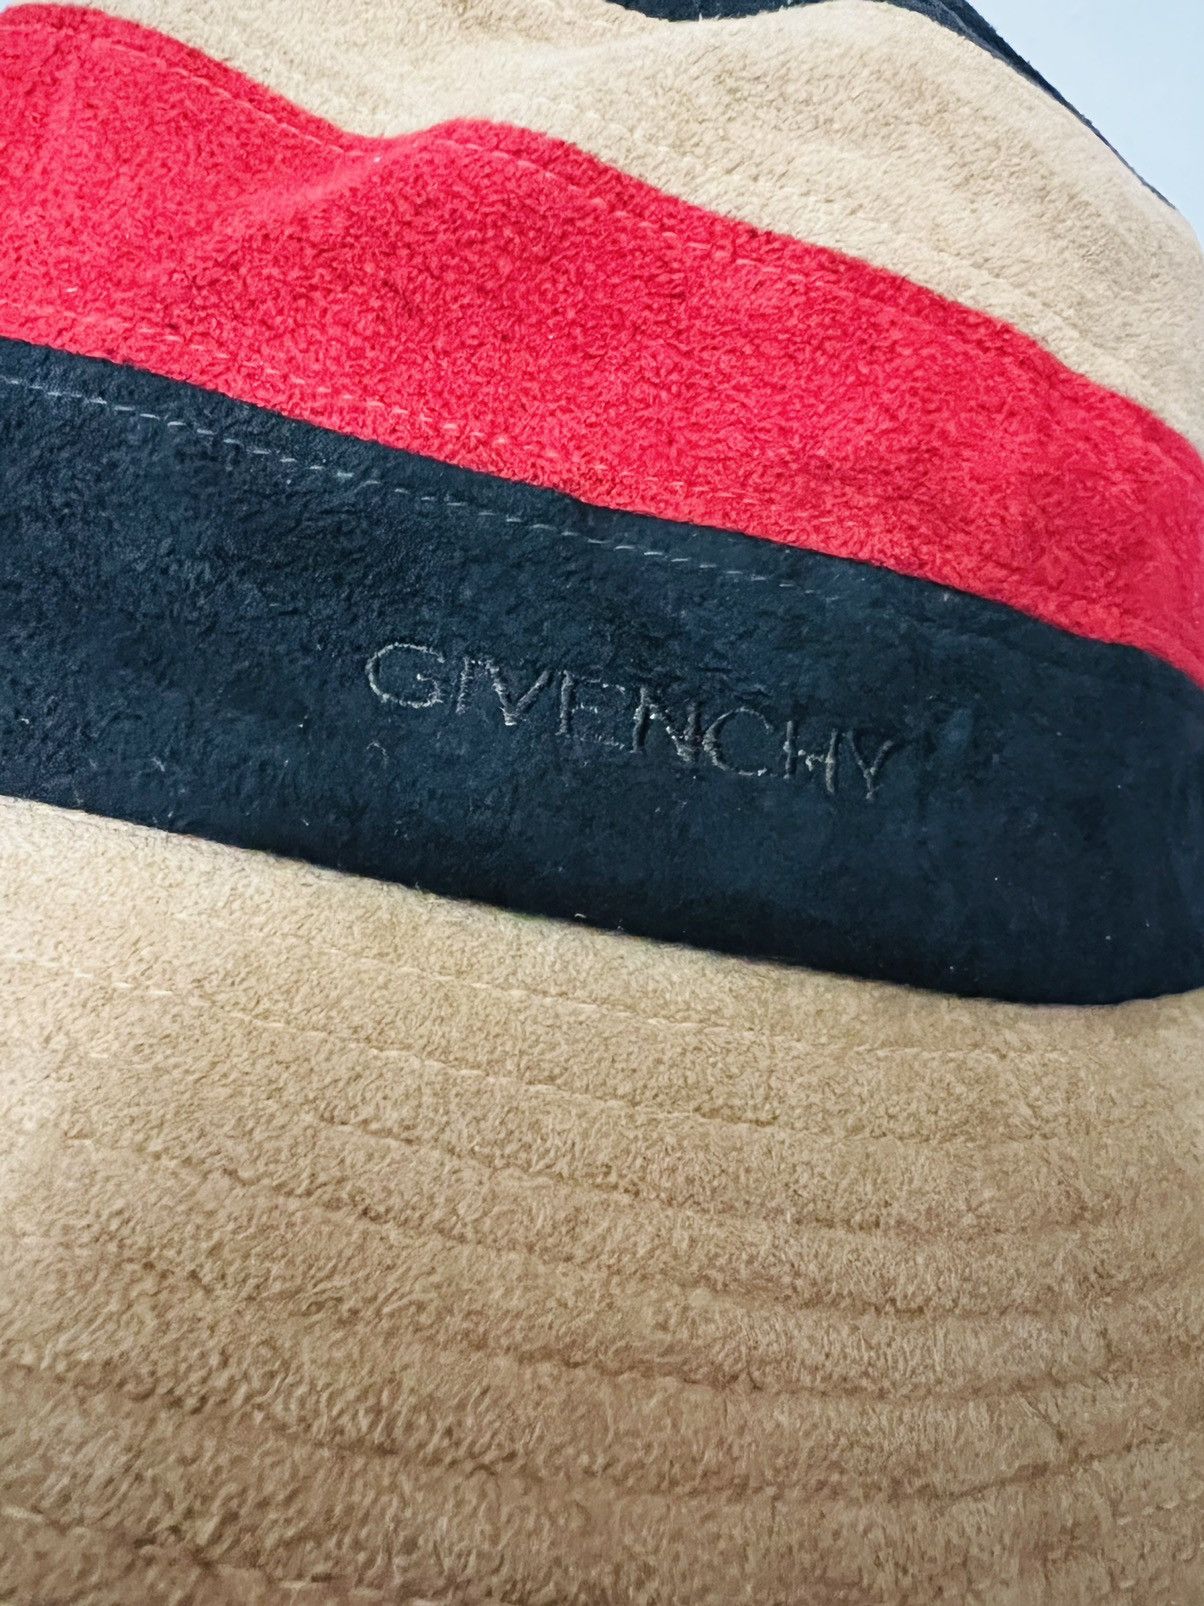 Vintage Givenchy Bucket Hat - 6